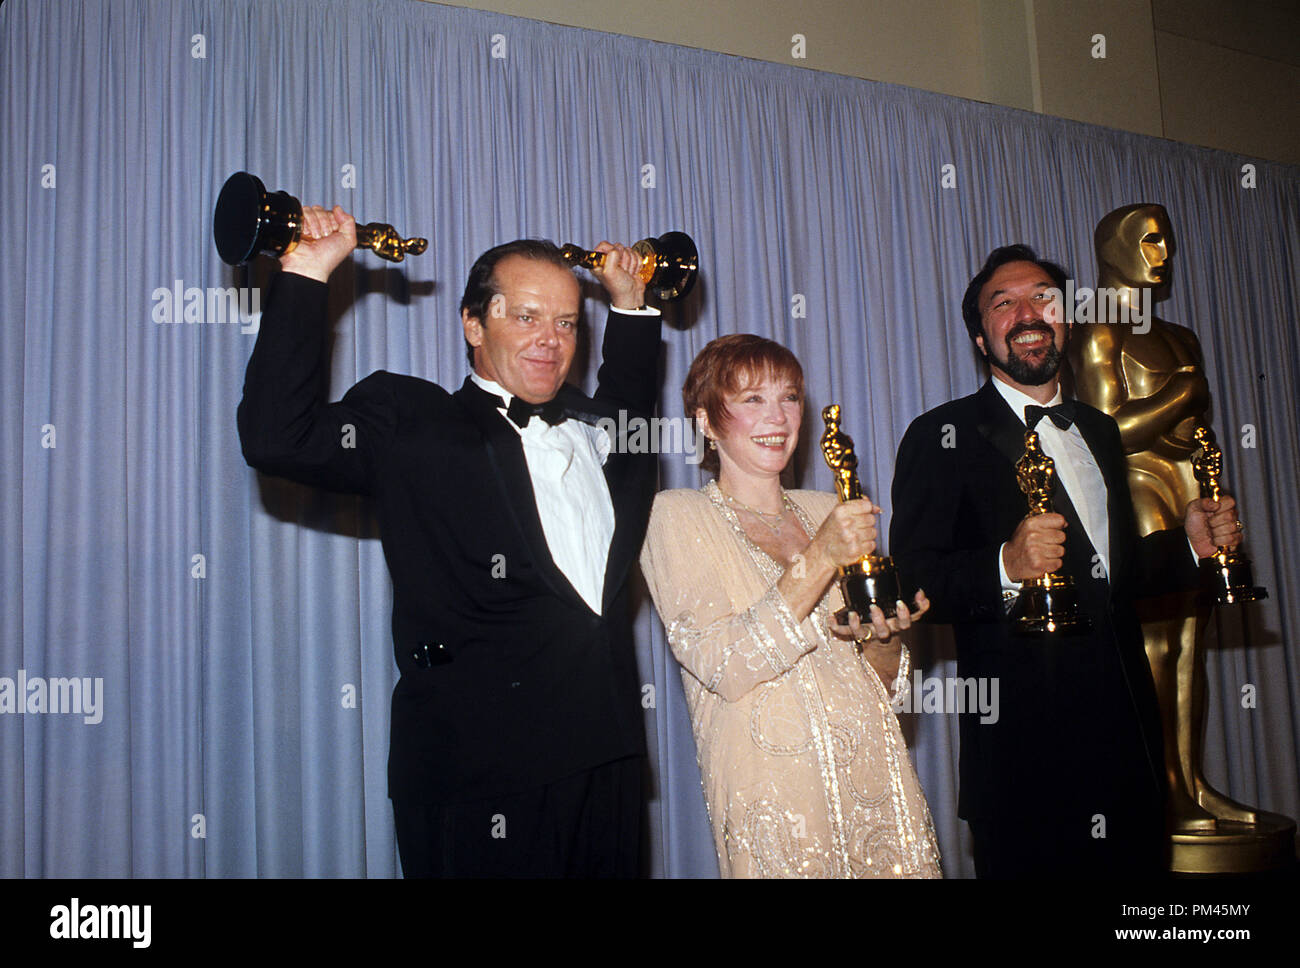 Jack Nicholson, Shirley MacLaine, and James L.  Brooks, Academy Award Winners for 'Terms of Endearment' April 9,1984. File Reference #1038 014THA © JRC /The Hollywood Archive - All Rights Reserved. Stock Photo